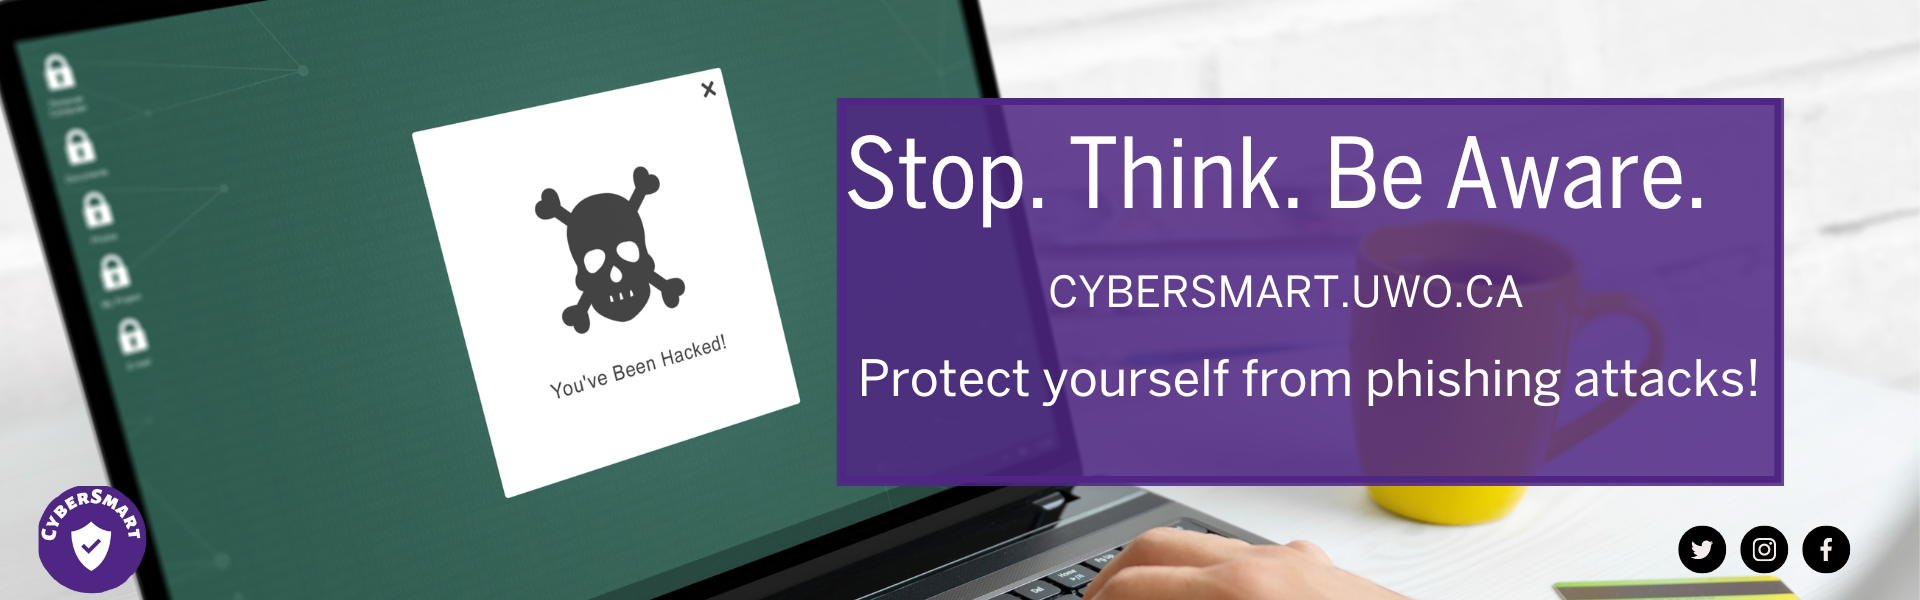 Stop. Think. Be Aware. Protect yourself from phishing attacks.